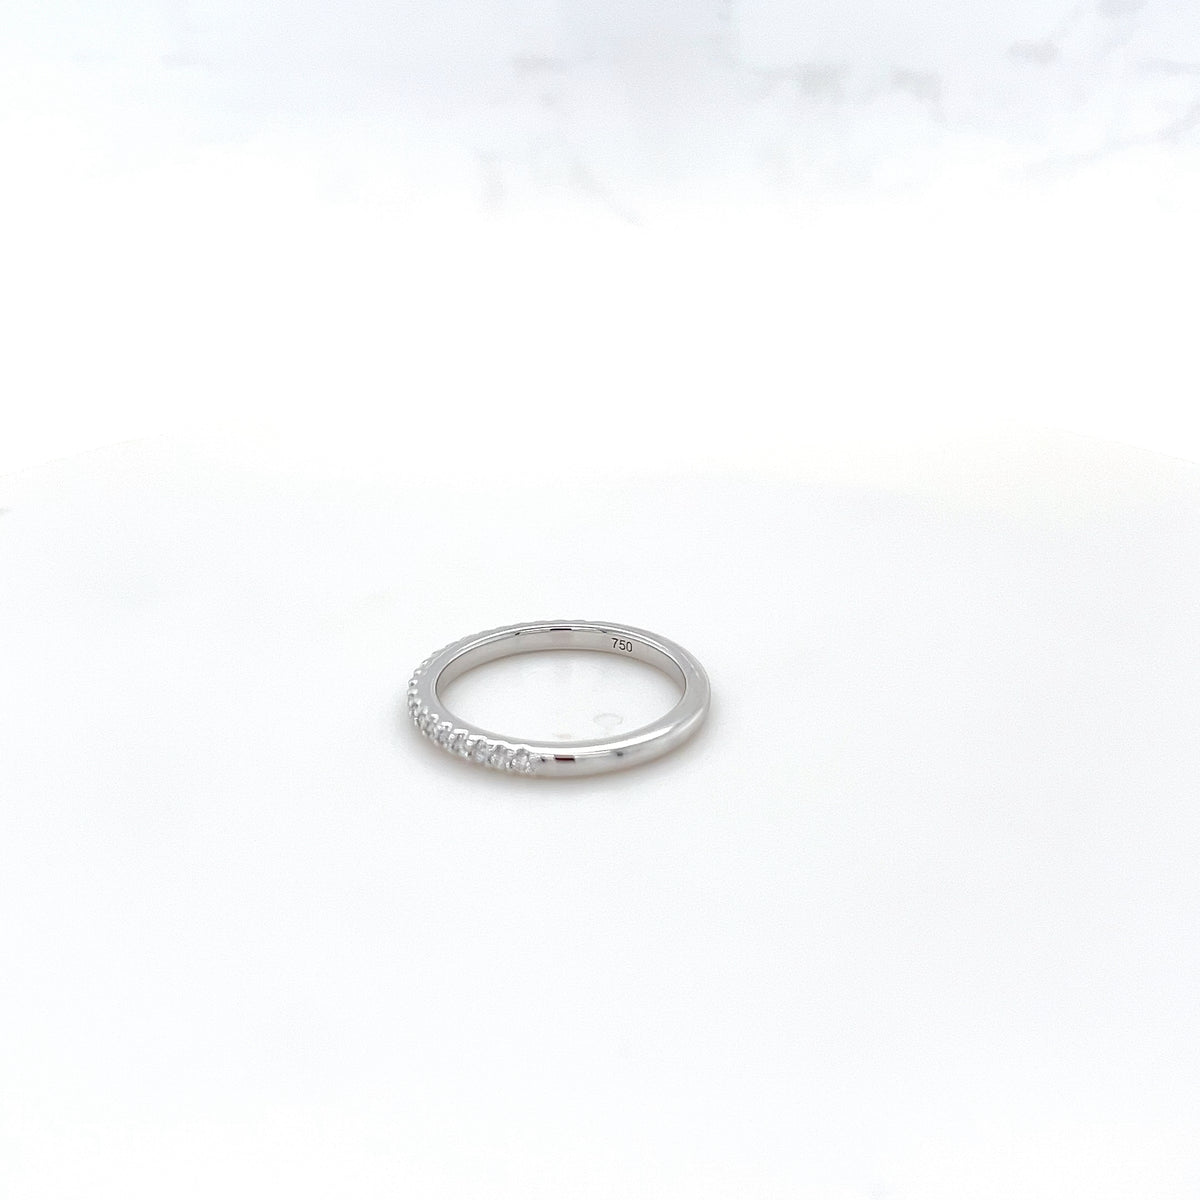 Wedding Eternity Ring with White Gold and Diamonds 18k Gold - Orsini Jewellers